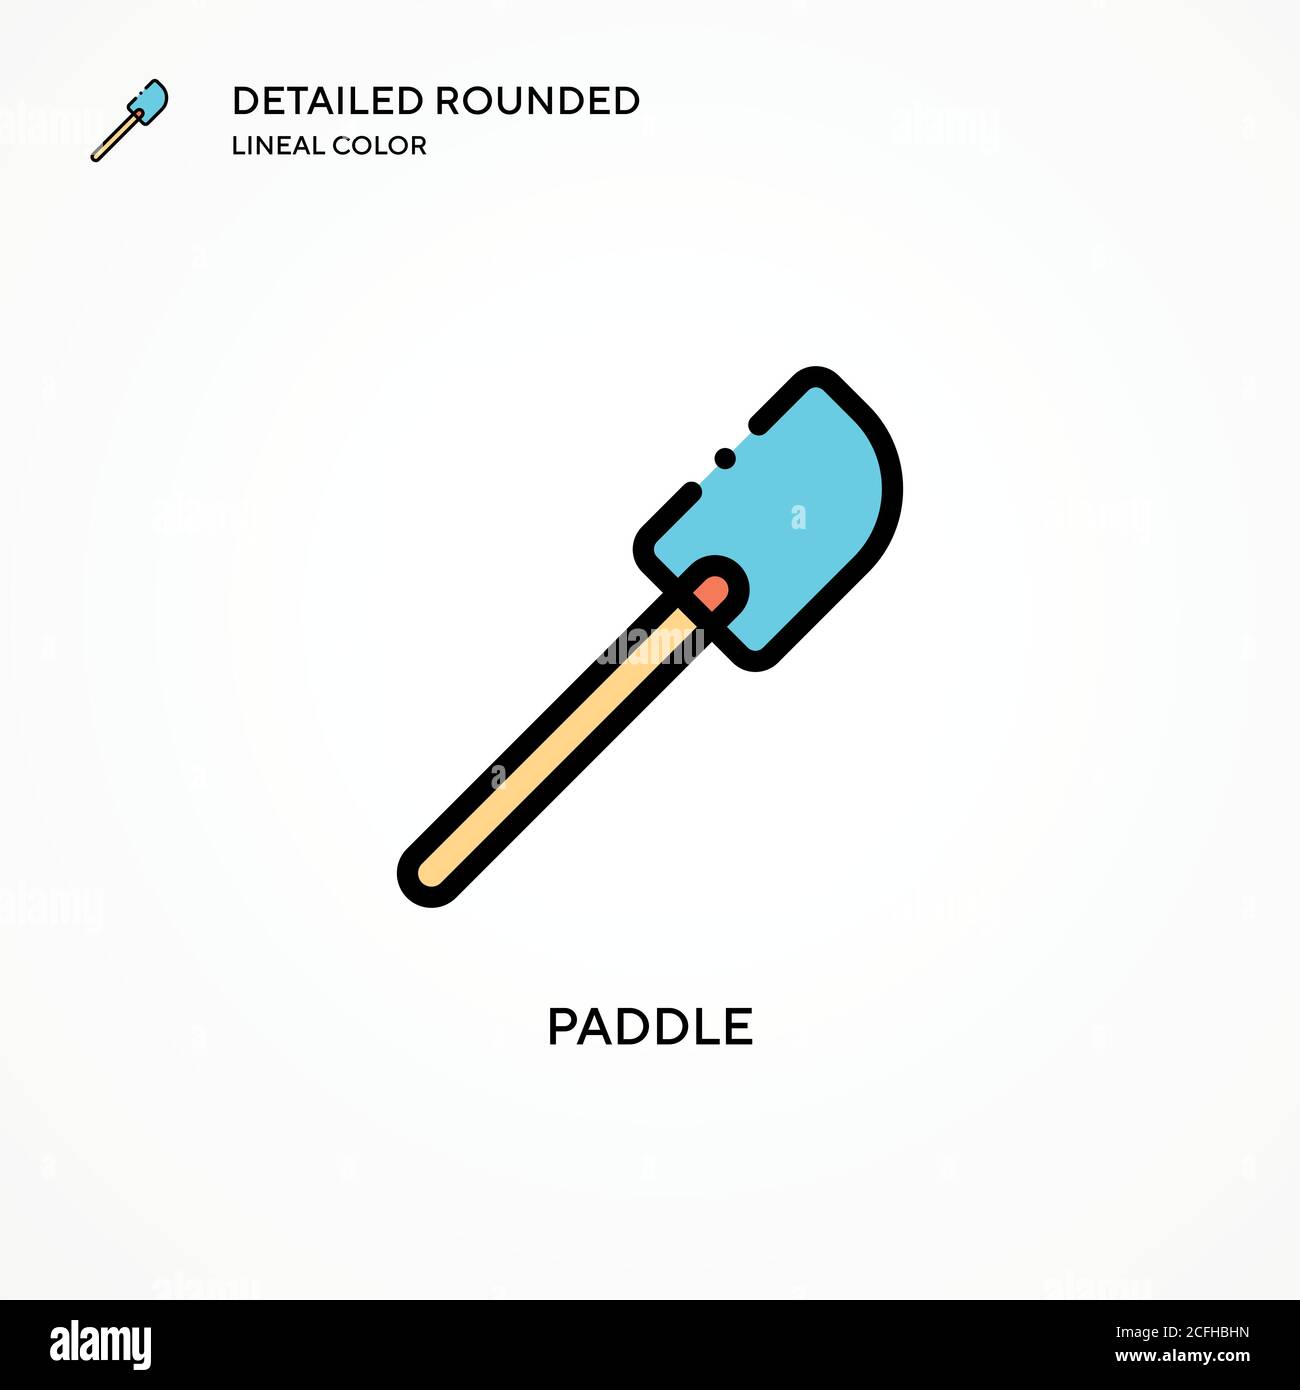 Paddle vector icon. Modern vector illustration concepts. Easy to edit and customize. Stock Vector